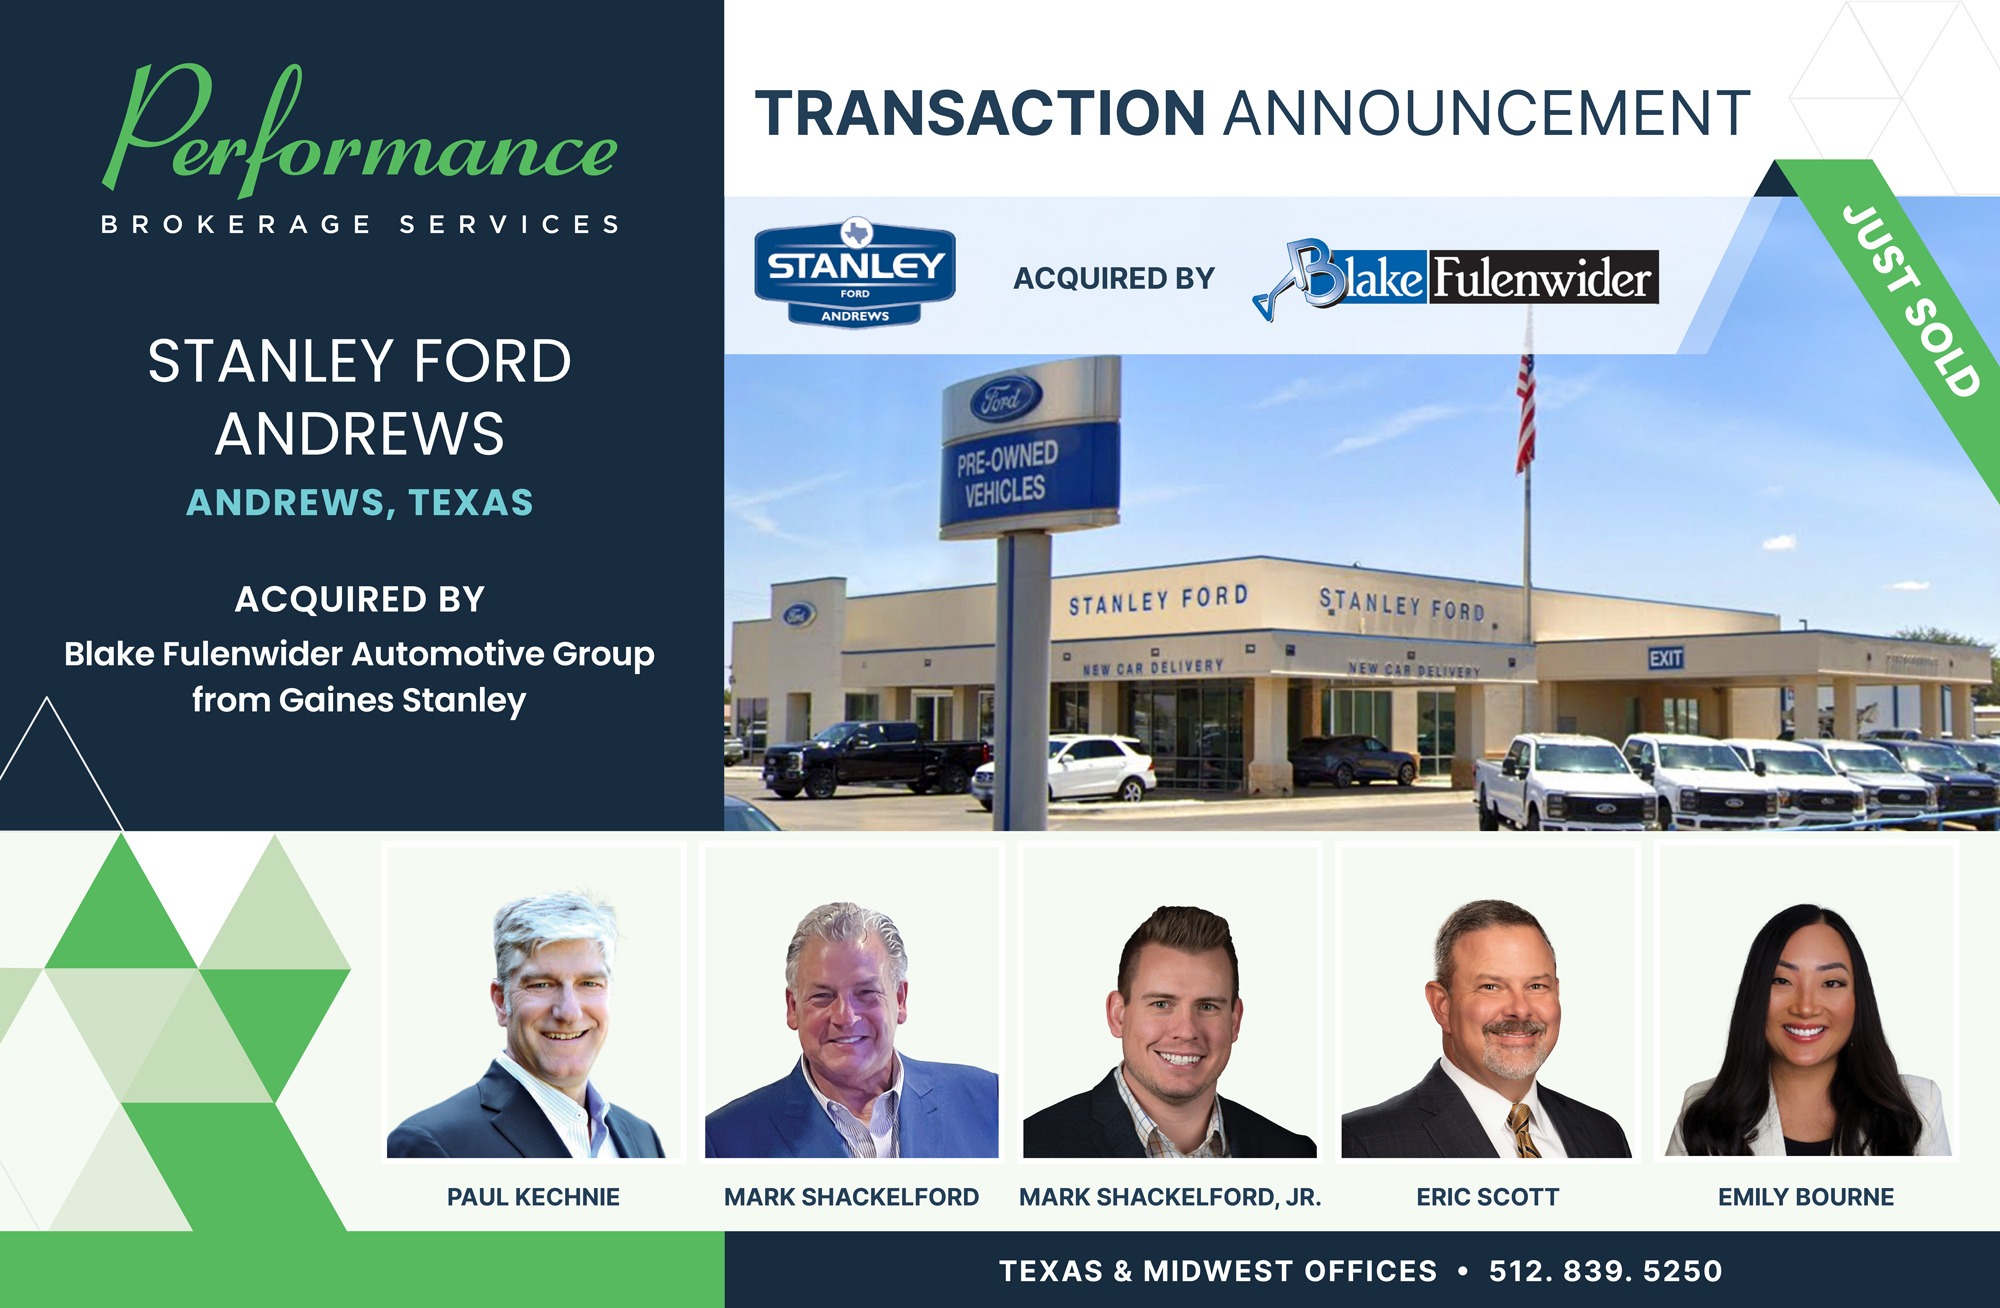 Stanley Ford sells to Blake Fulenwider with Performance Brokerage